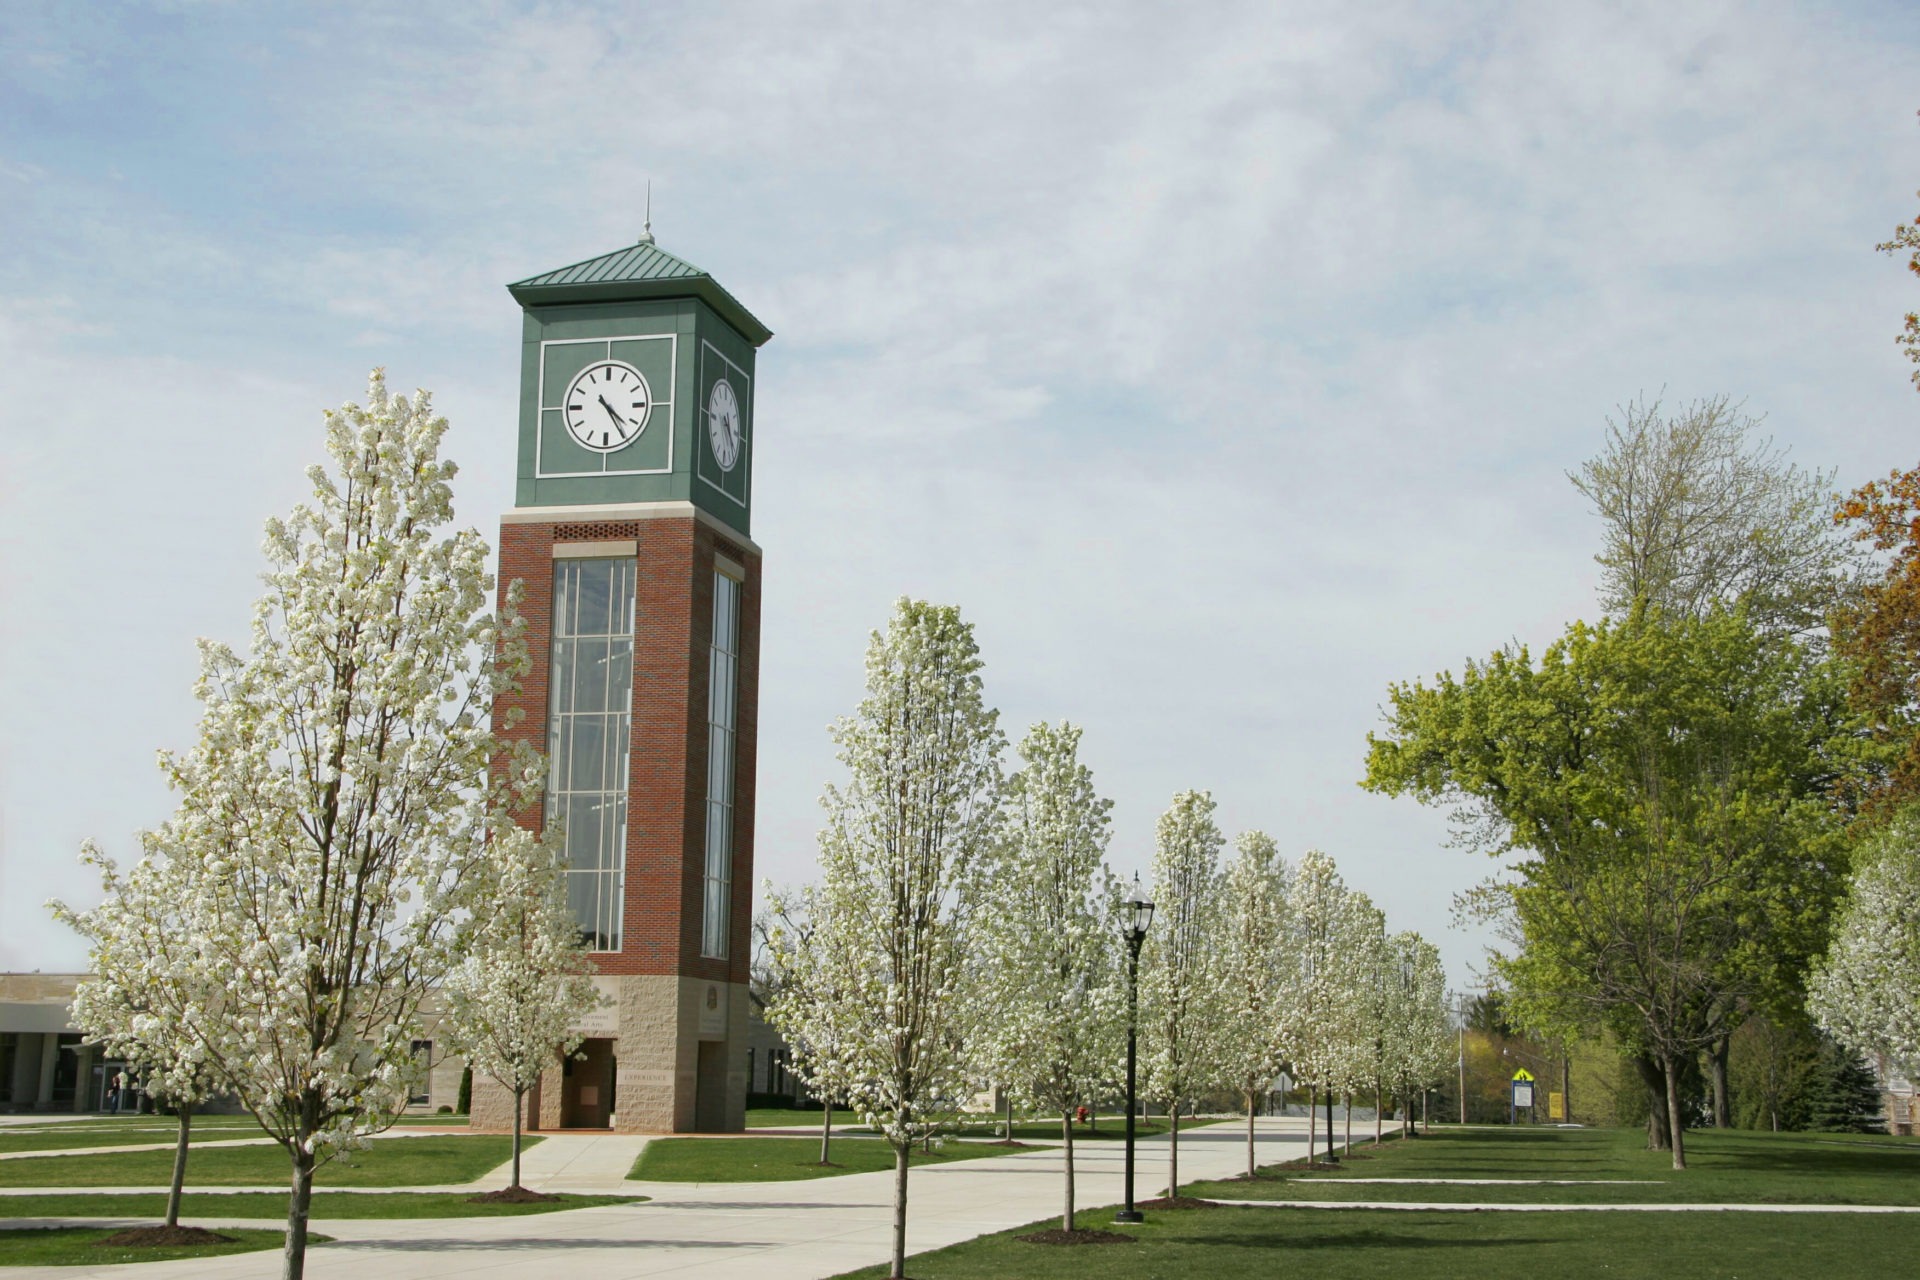 Campus clocktower and plaza during the spring